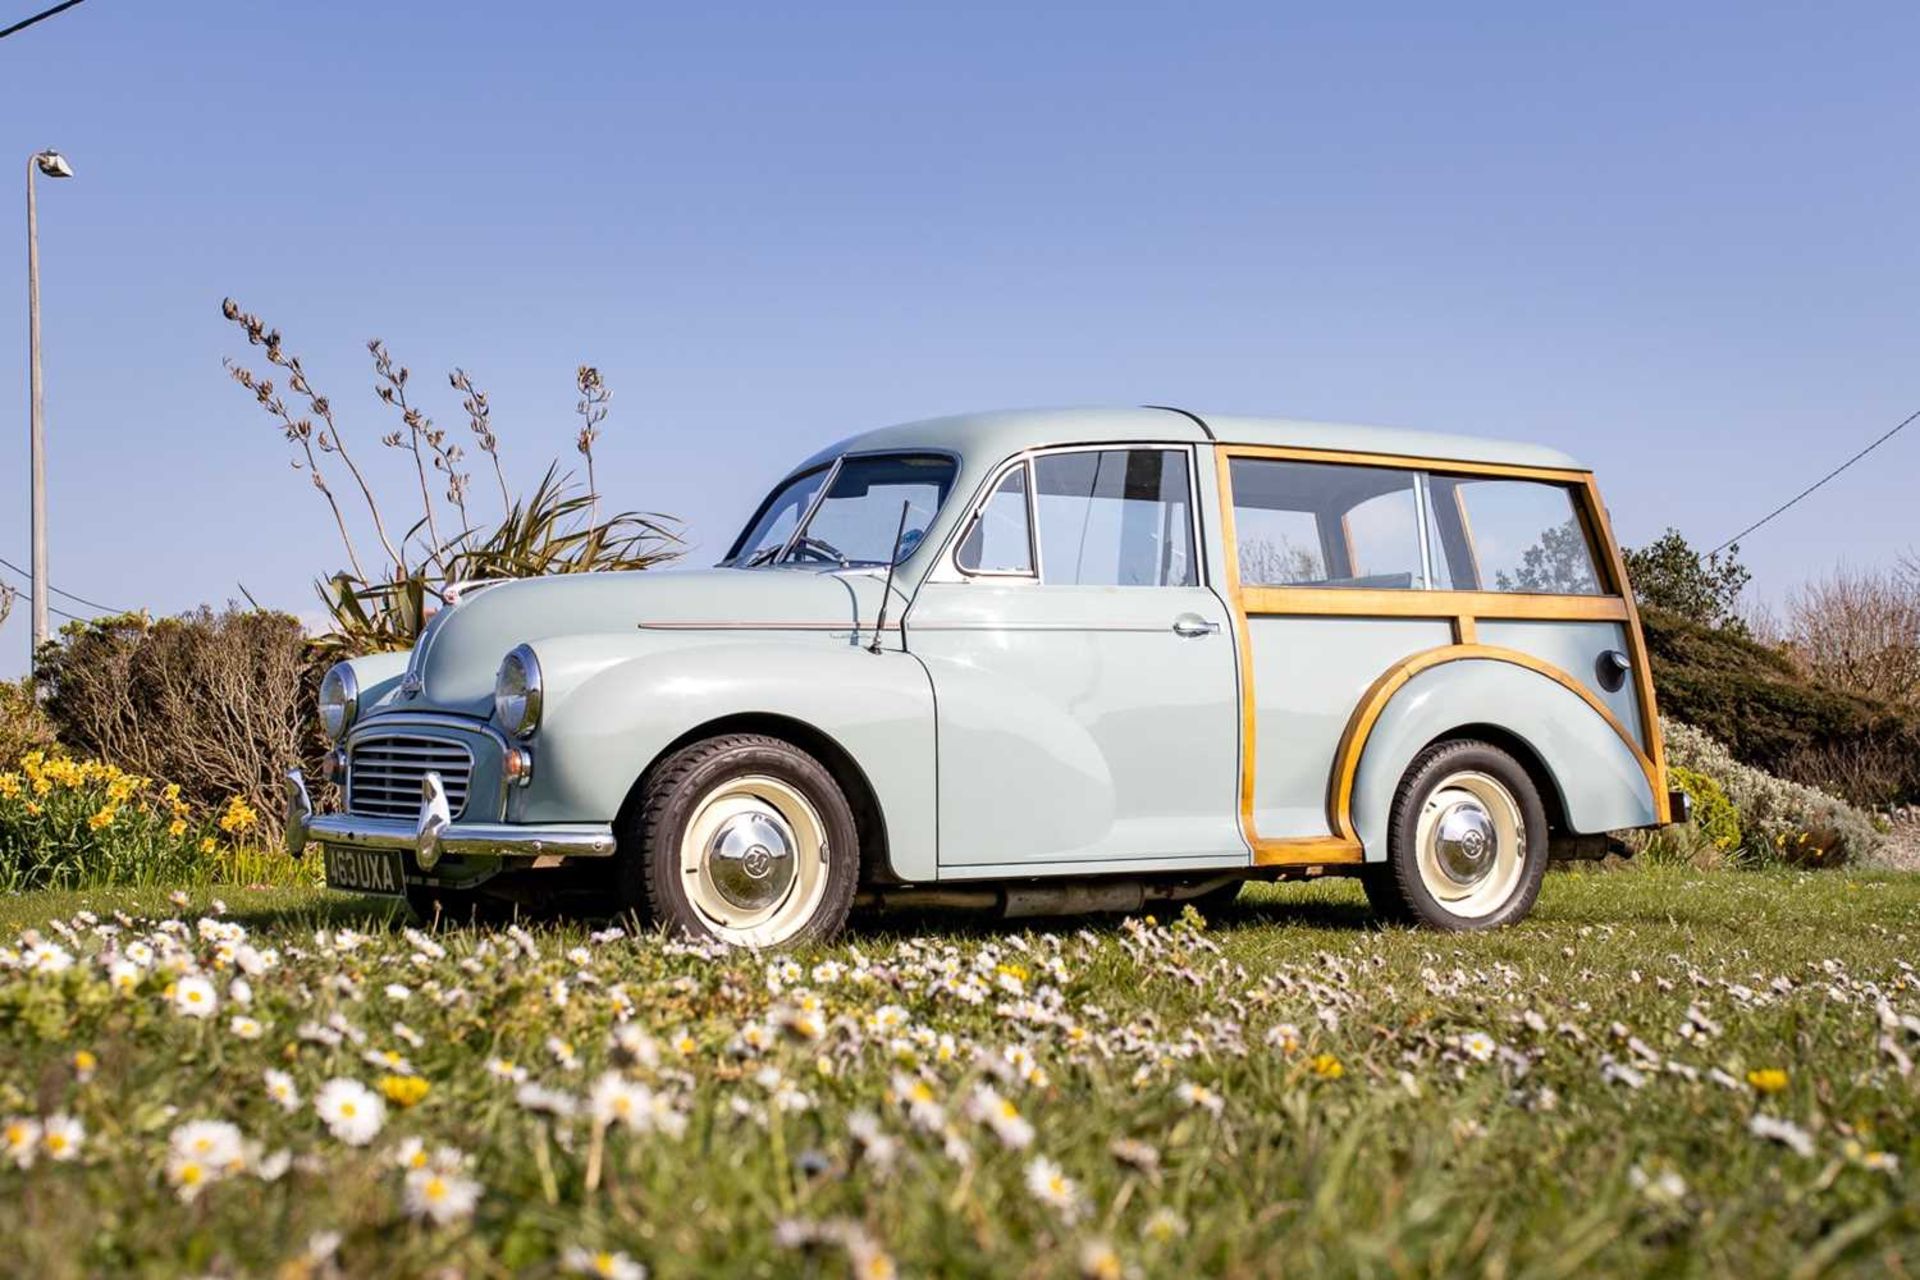 1956 Morris Minor Traveller Uprated with 1275cc engine  - Image 3 of 89